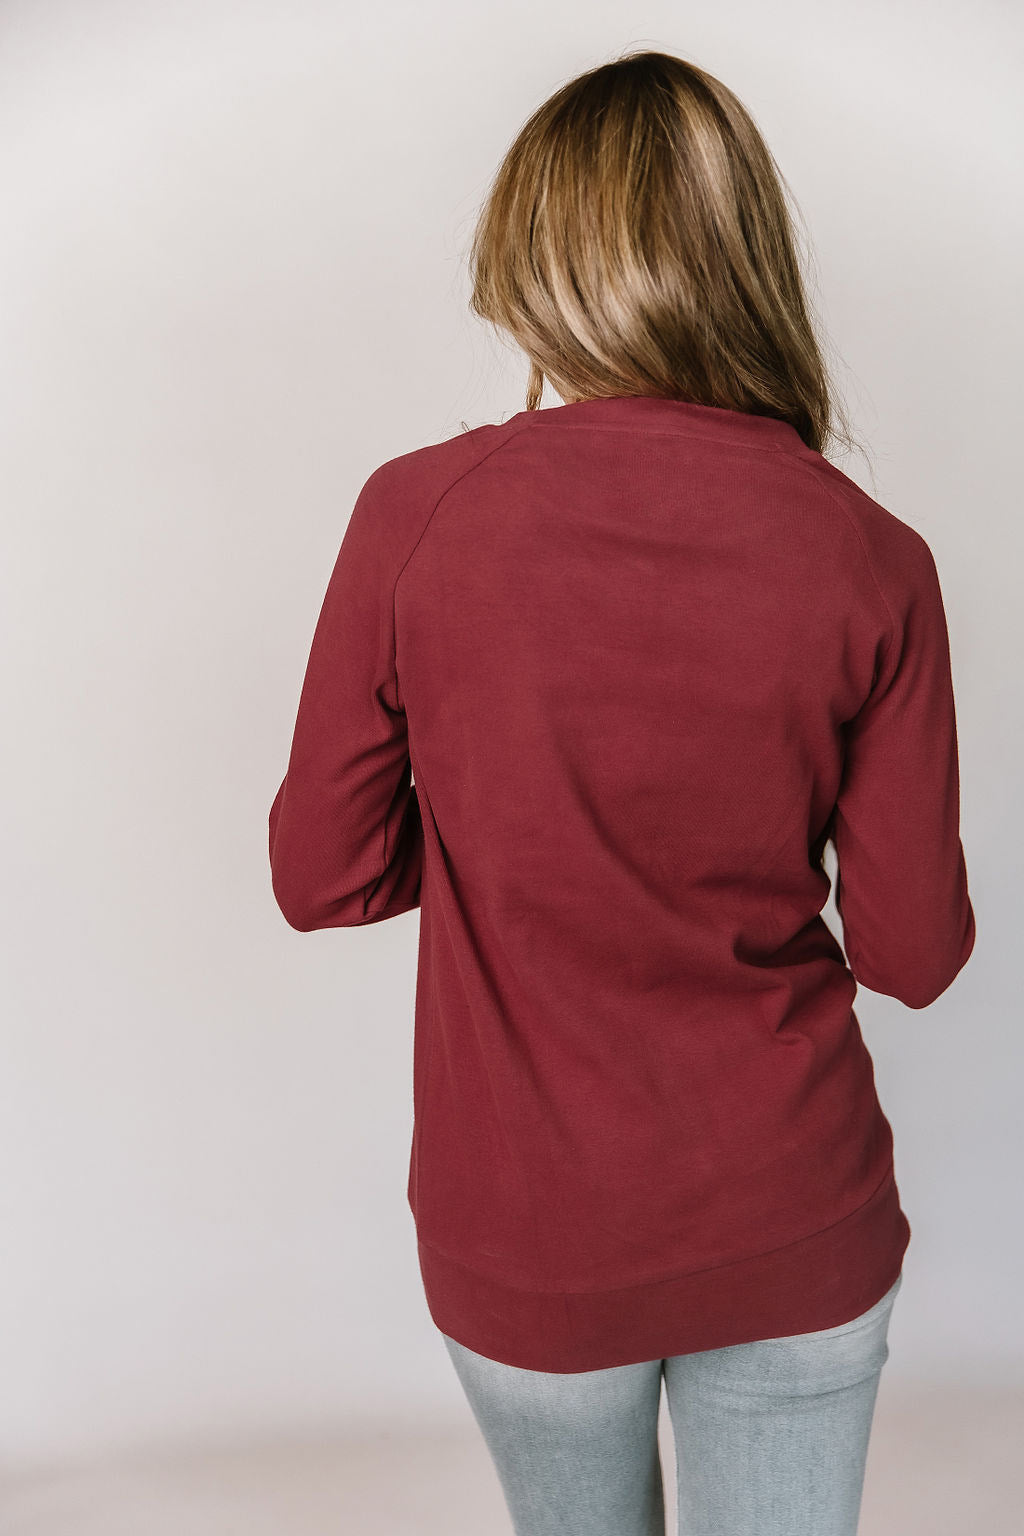 Ampersand classic pullover- cranberry